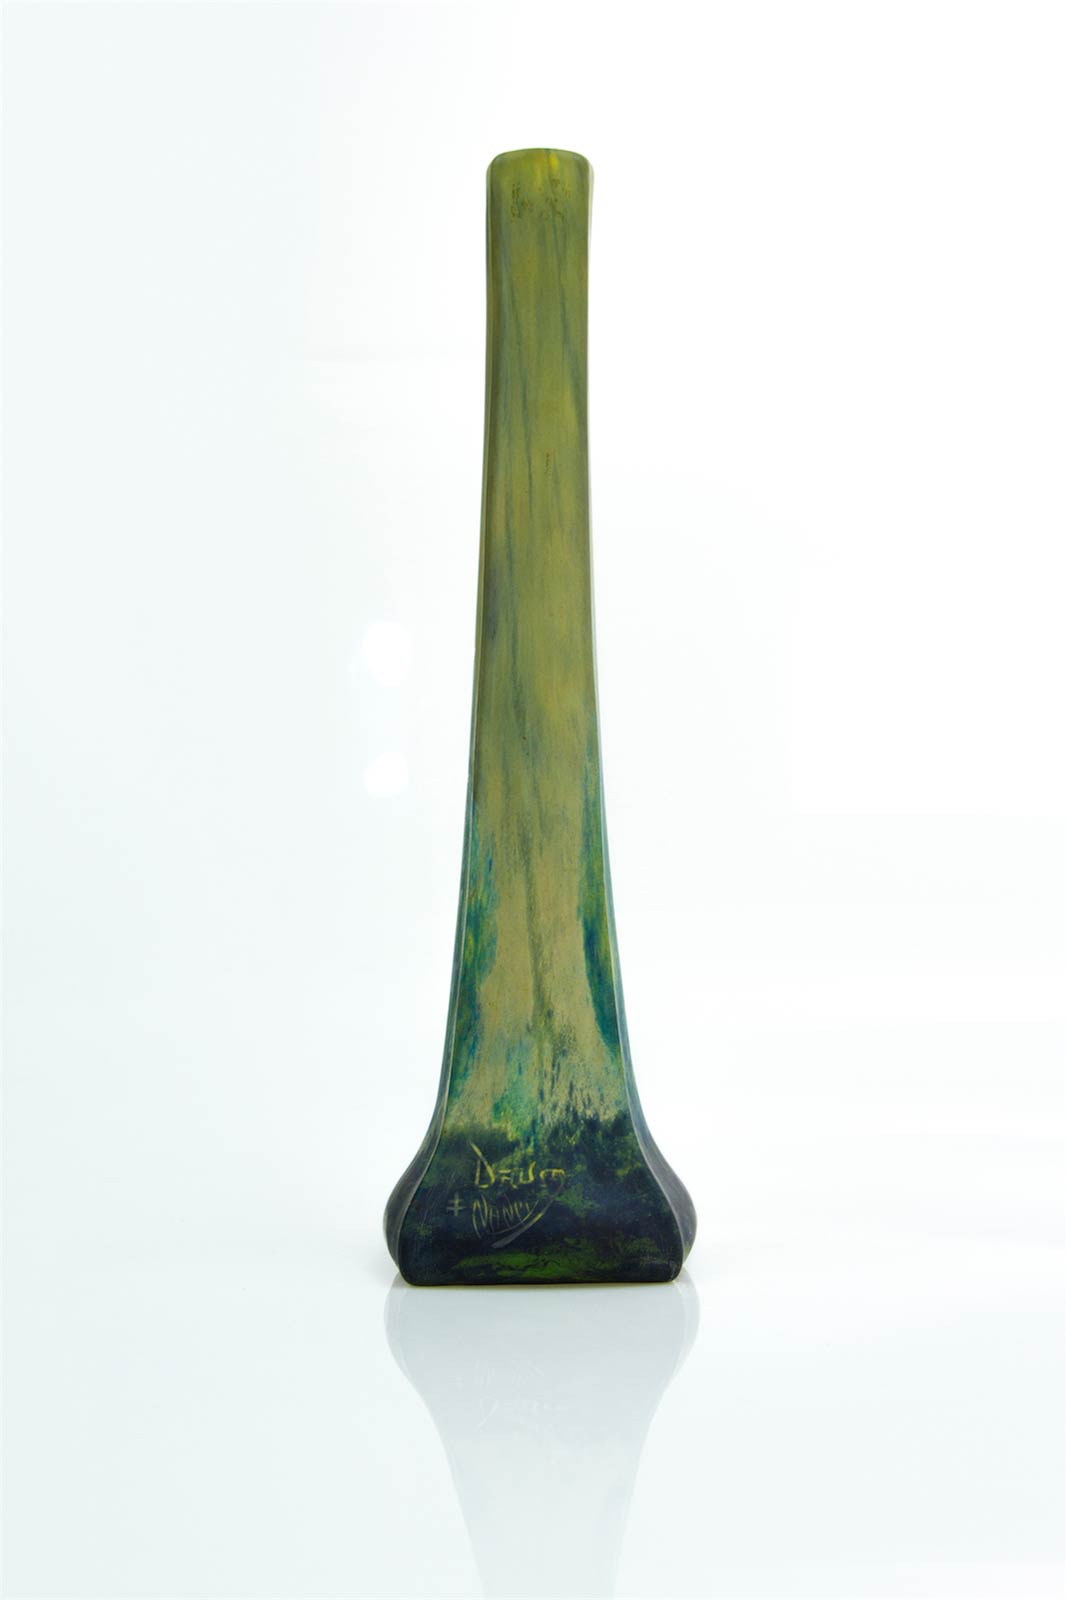 Daum glass vase, Early of XX Century, France, Nancy. Green and blue vase. H Cm 39